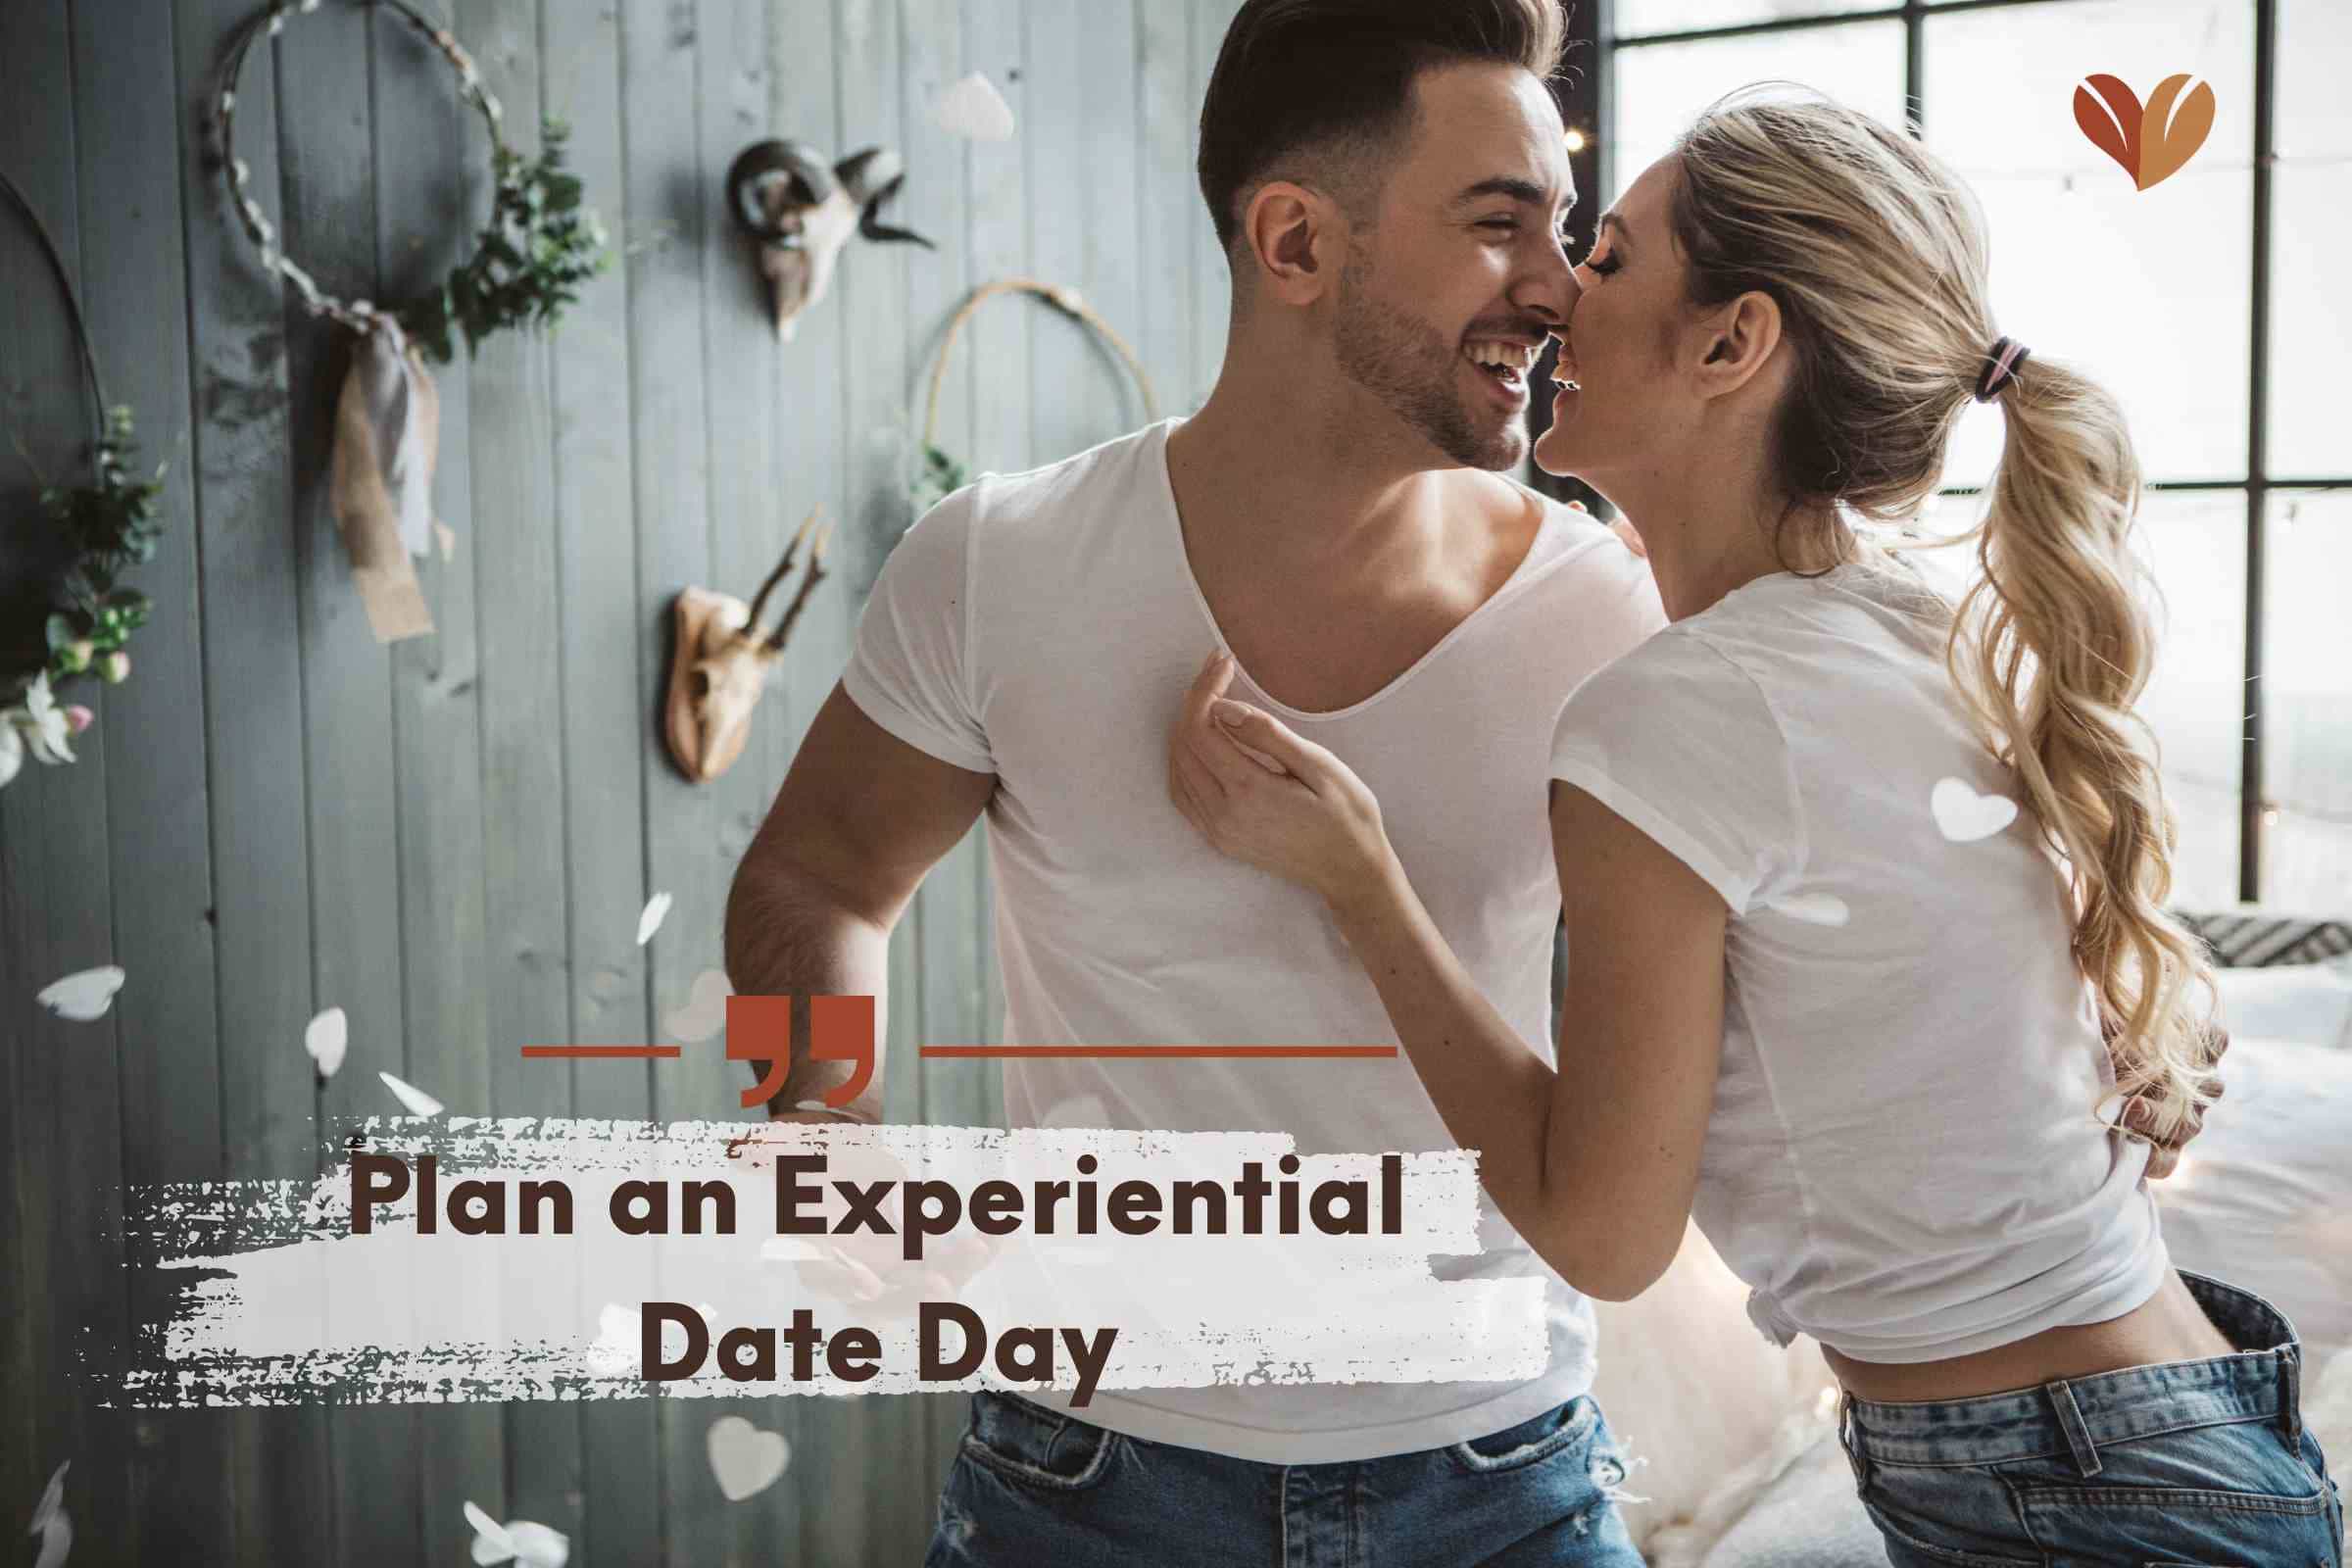 Plan an Experiential Date. Day. - 1 year anniversary ideas for girlfriend